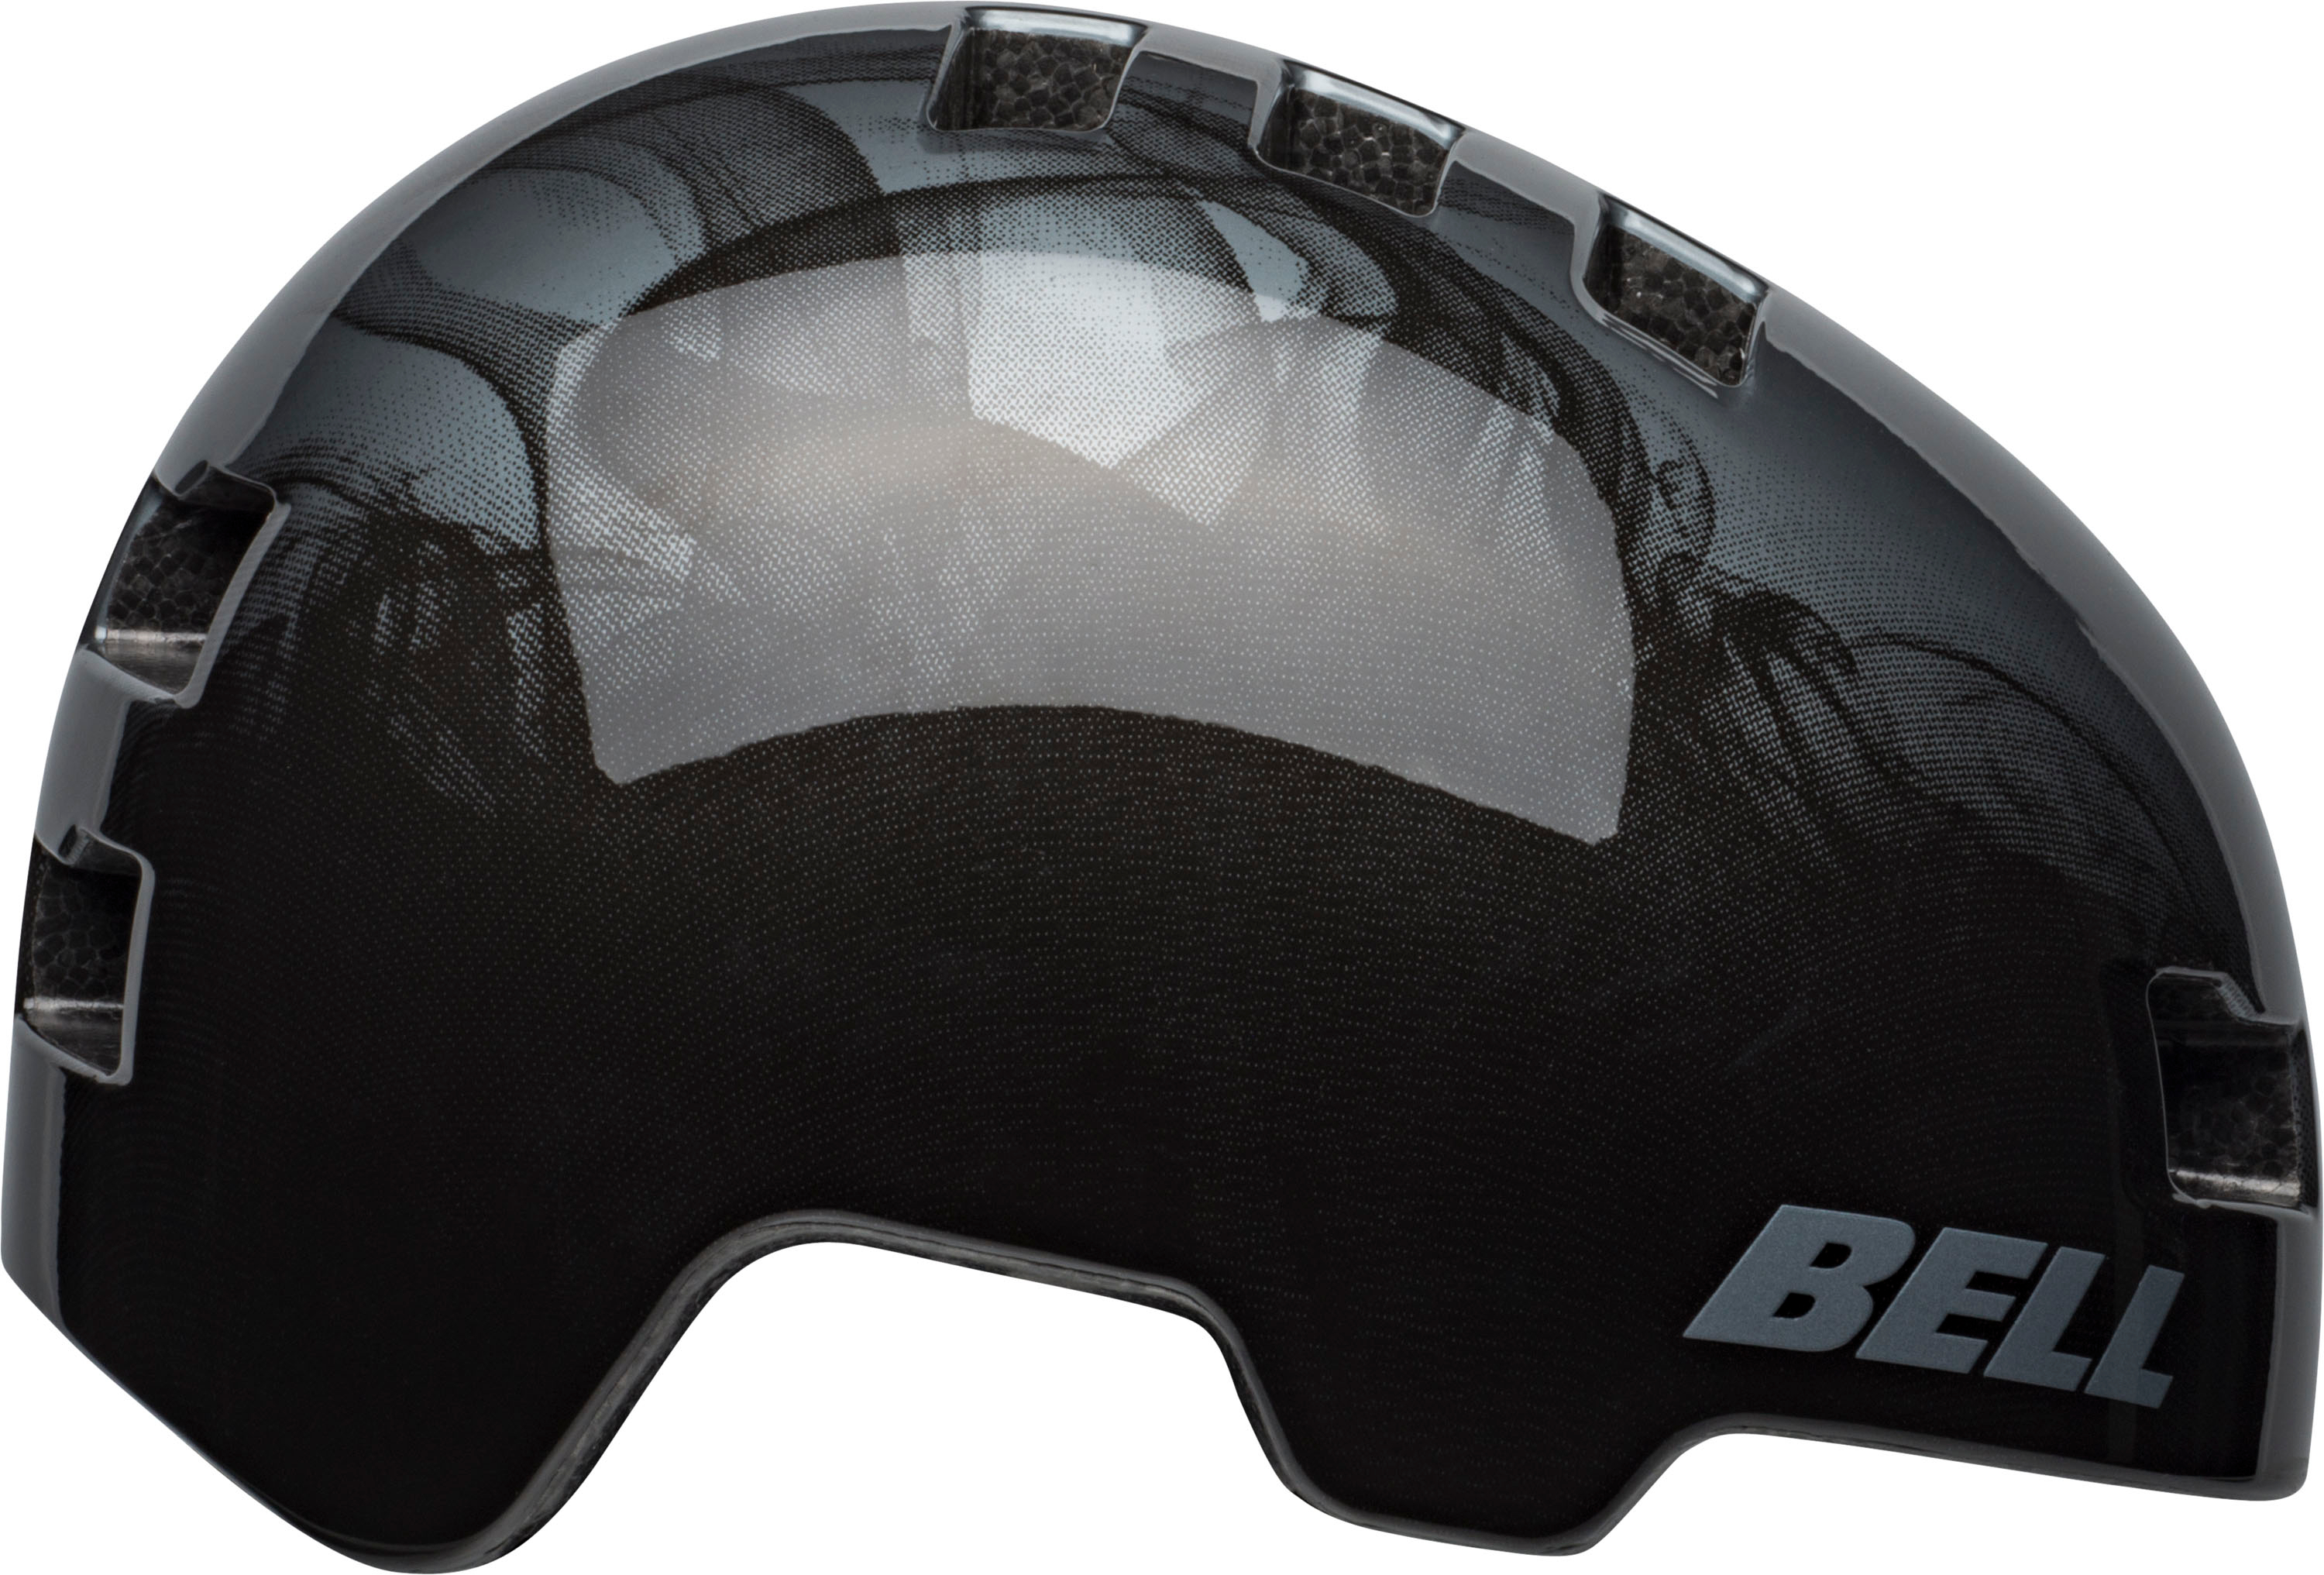 Angle View: Bell - Focus Multi-Sport Helmet - Youth - Black